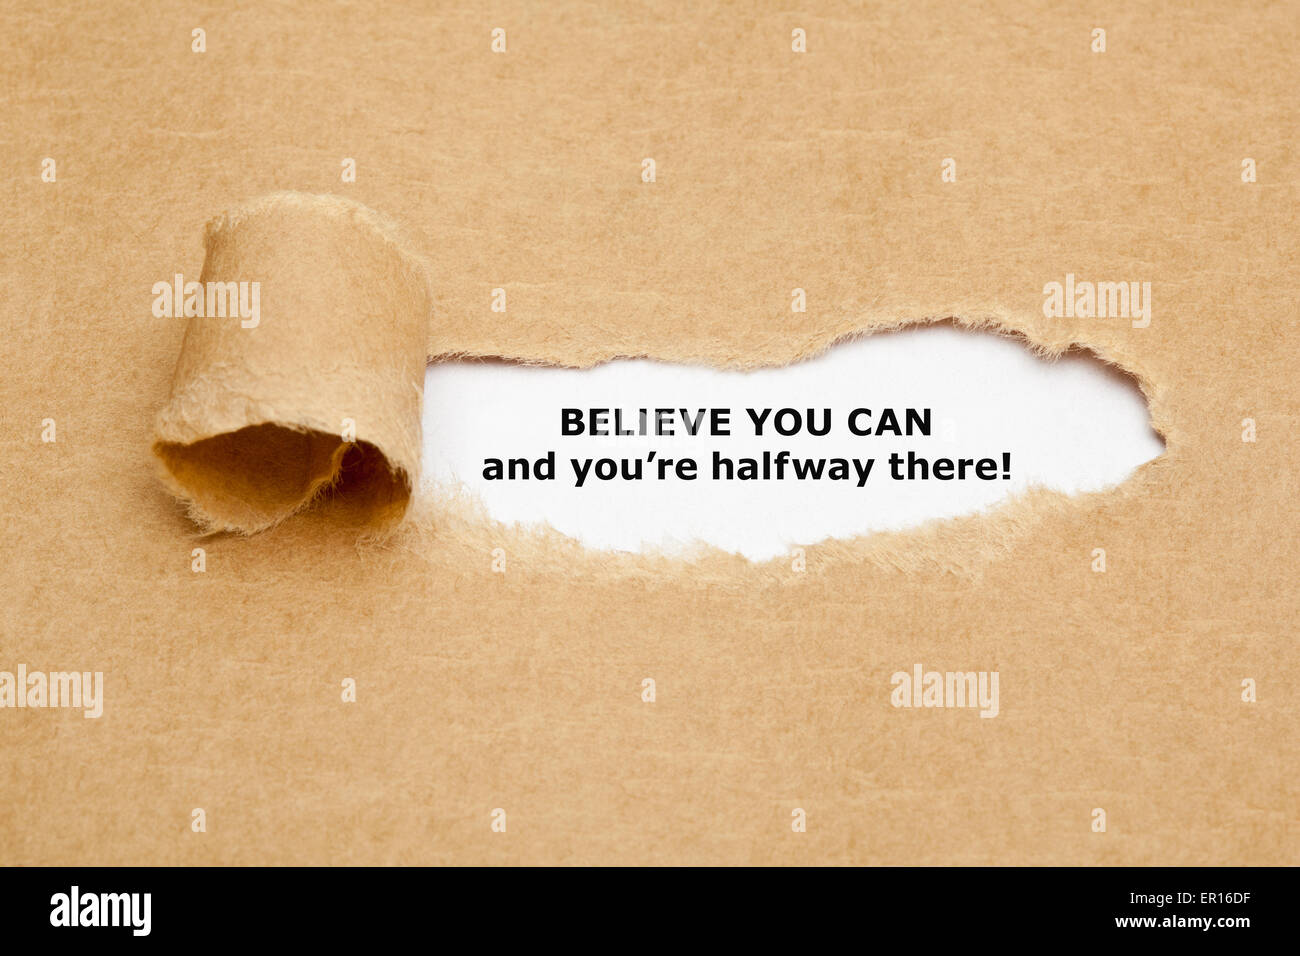 The text Believe you can and you're halfway there, appearing behind torn brown paper. Stock Photo